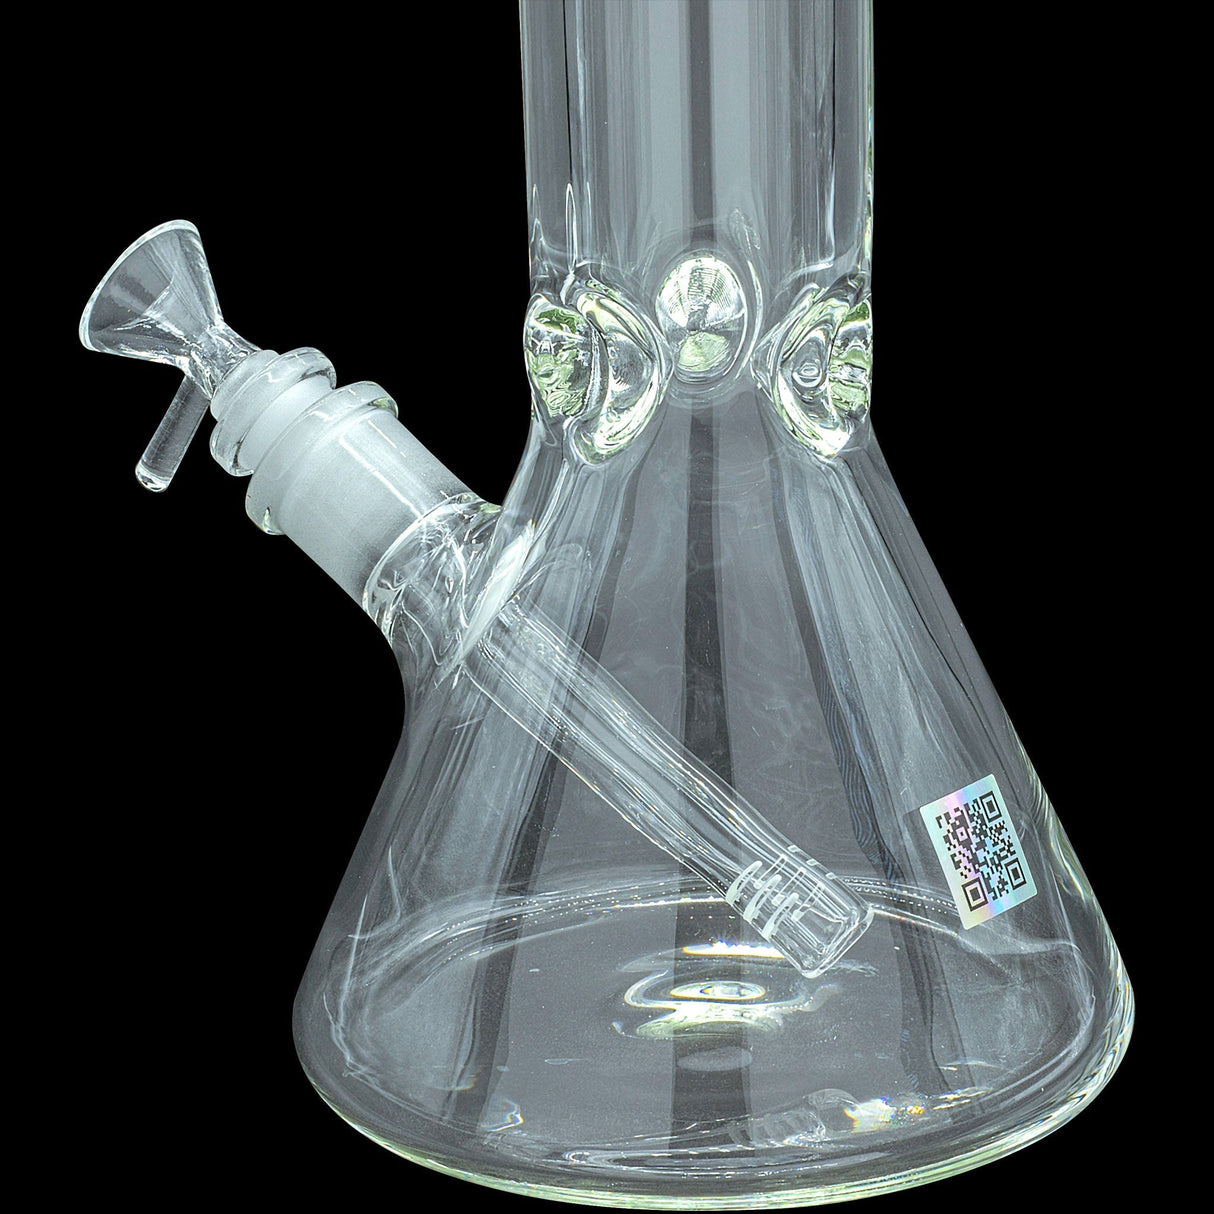 LA Pipes "Squared Up" 9mm Thick Beaker Bong, Clear Borosilicate Glass, Side View